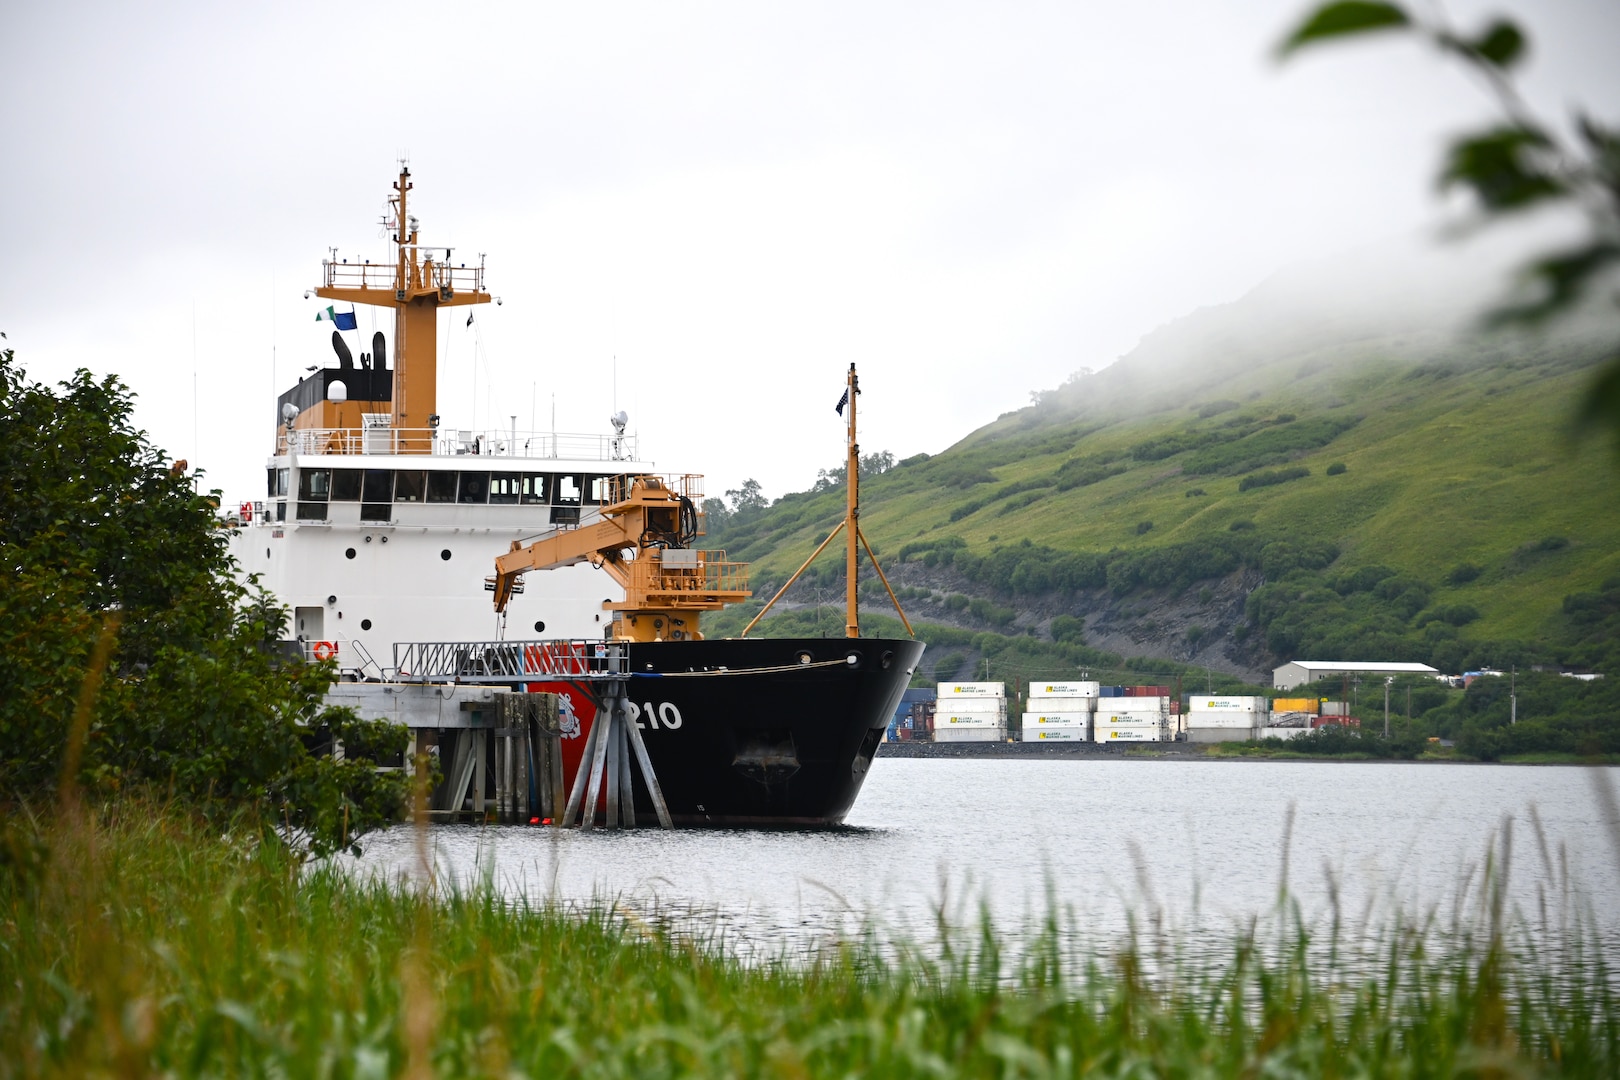 Coast Guard Cutter Cypress sits moored to a pier on Base Kodiak in Womens Bay, Alaska, on Aug. 11, 2022. The Cypress crew fills the role as the “Aleutian Keeper” and are responsible for servicing aids to navigation throughout Kodiak and the Aleutian Chain. U.S. Coast Guard photo by Petty Officer 3rd Class Ian Gray.